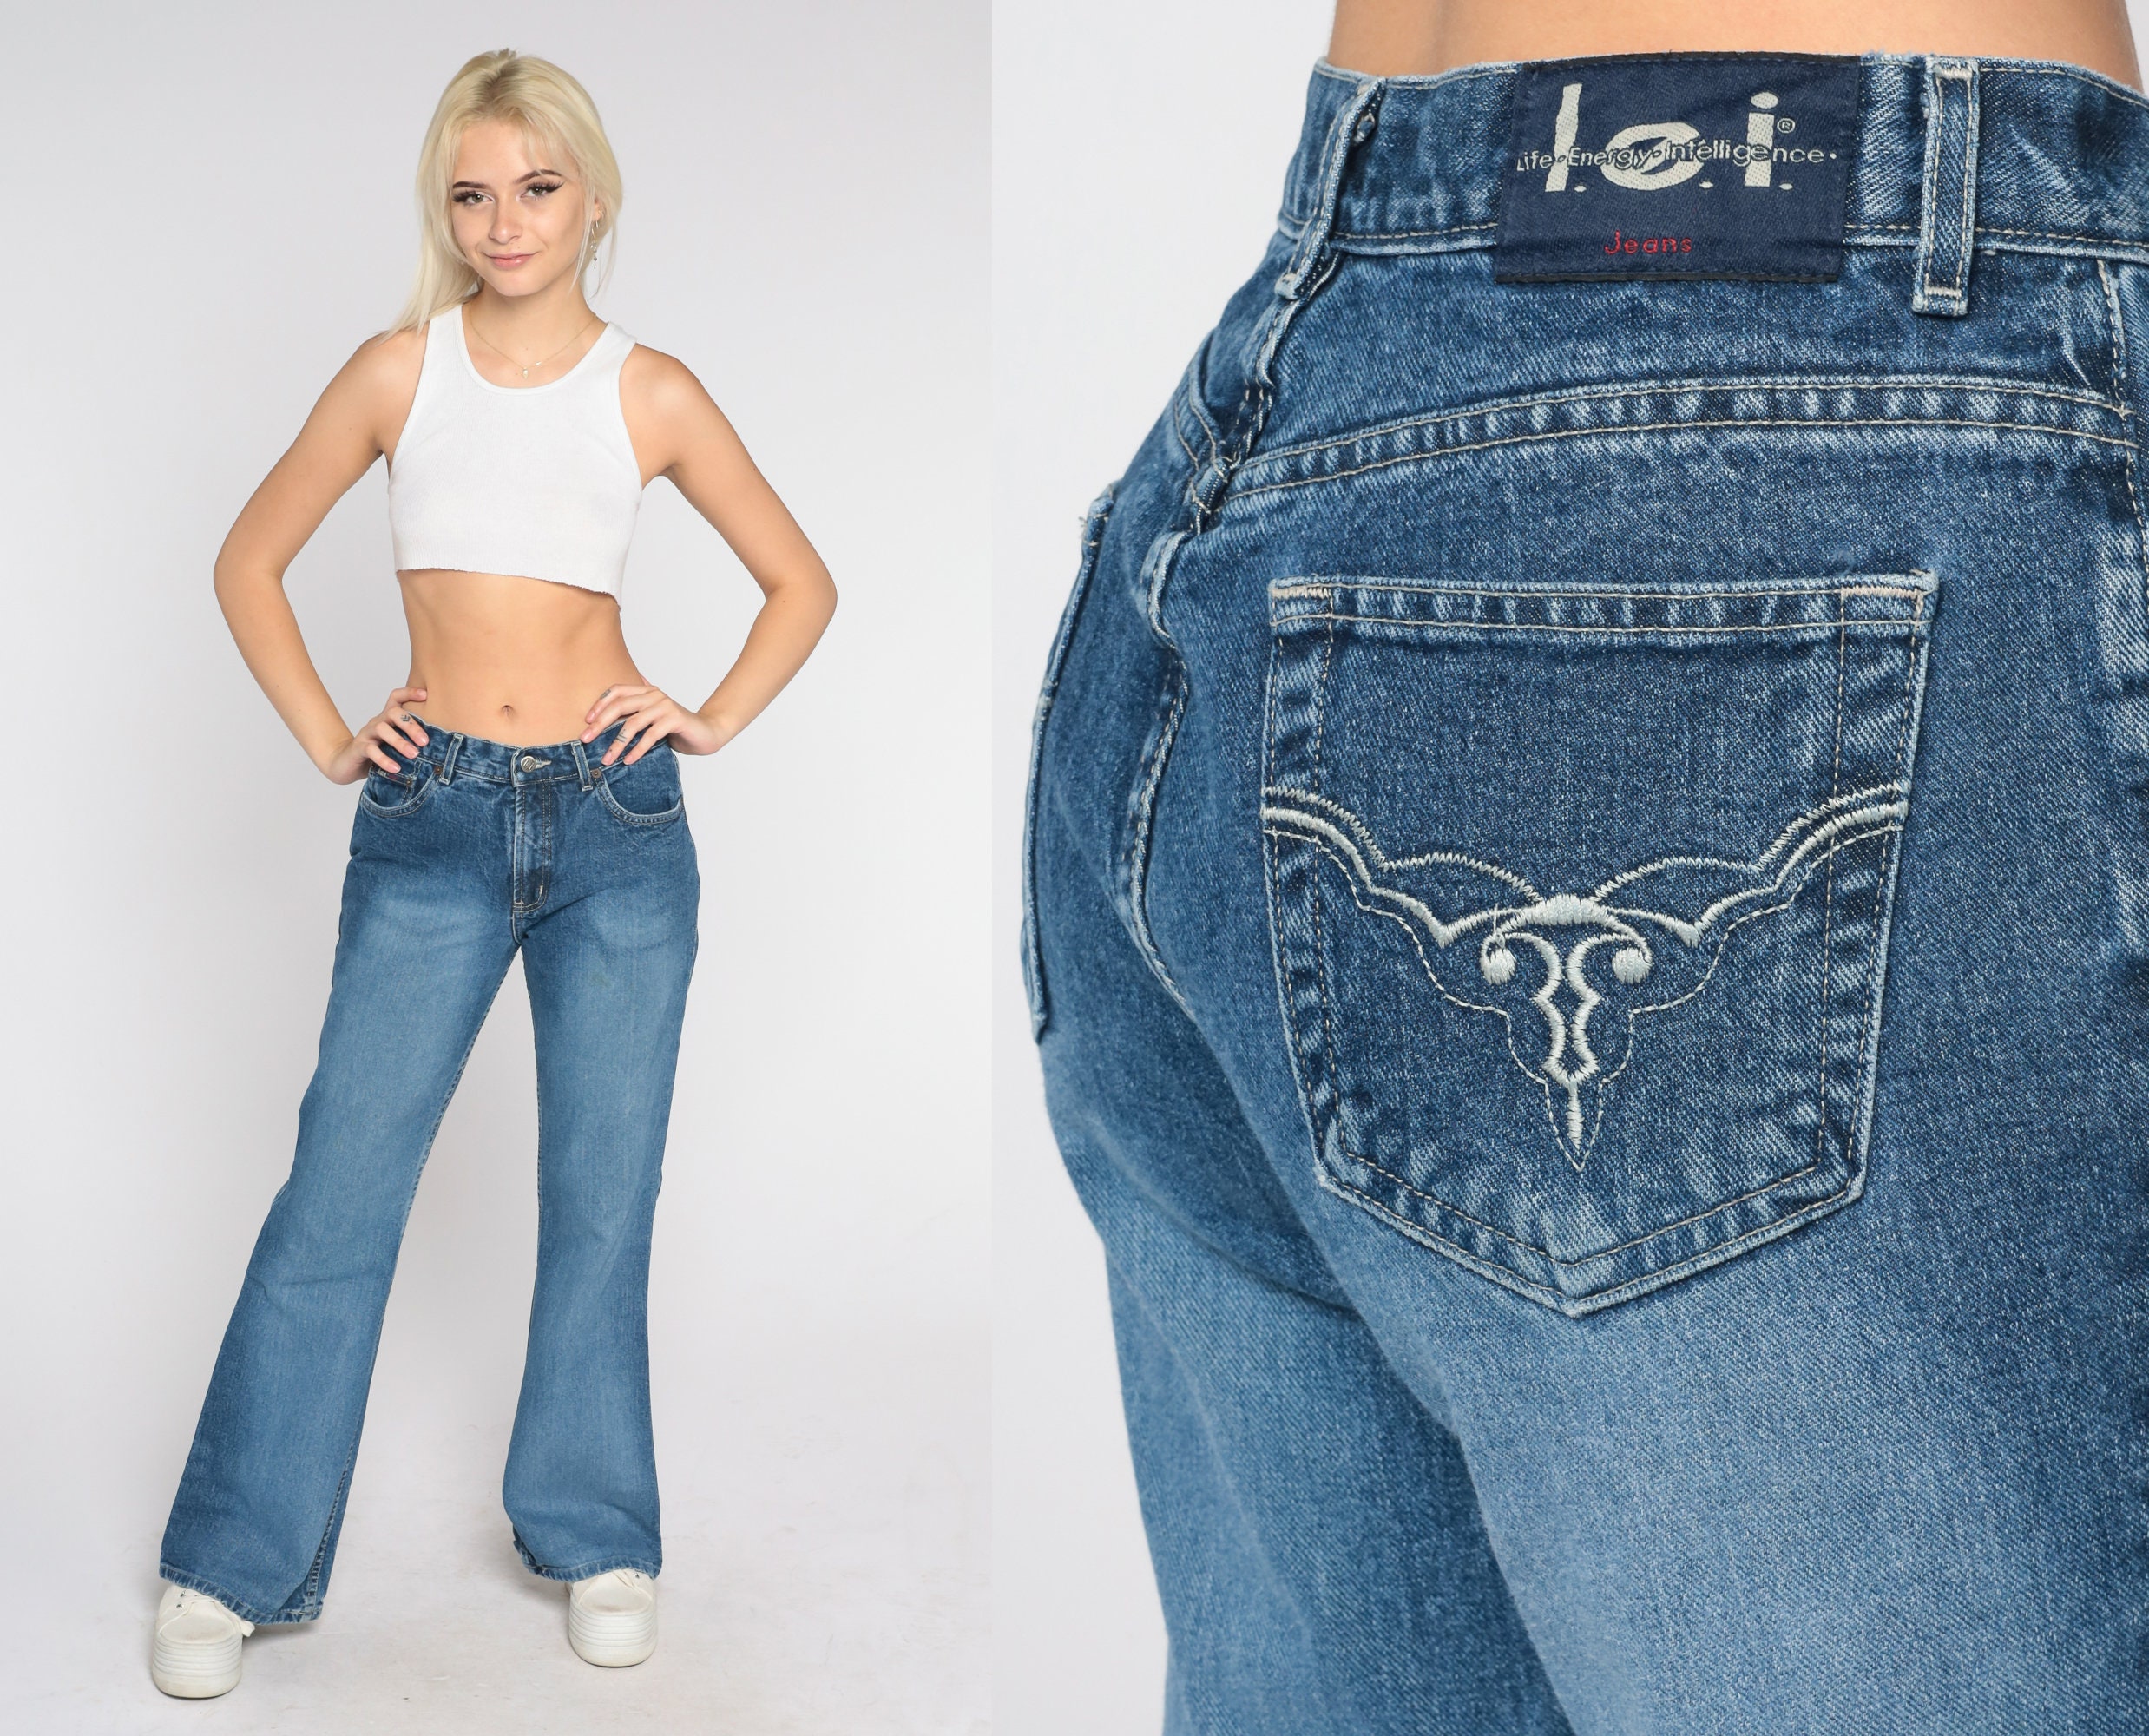 Y2K Jeans Lei Flared Jeans Jeans Denim Bell Bottom Jeans Boho Hippie Pants  Retro Faded Blue Bootcut Flares Mid Rise Vintage 00s Medium 9 30 -   Israel